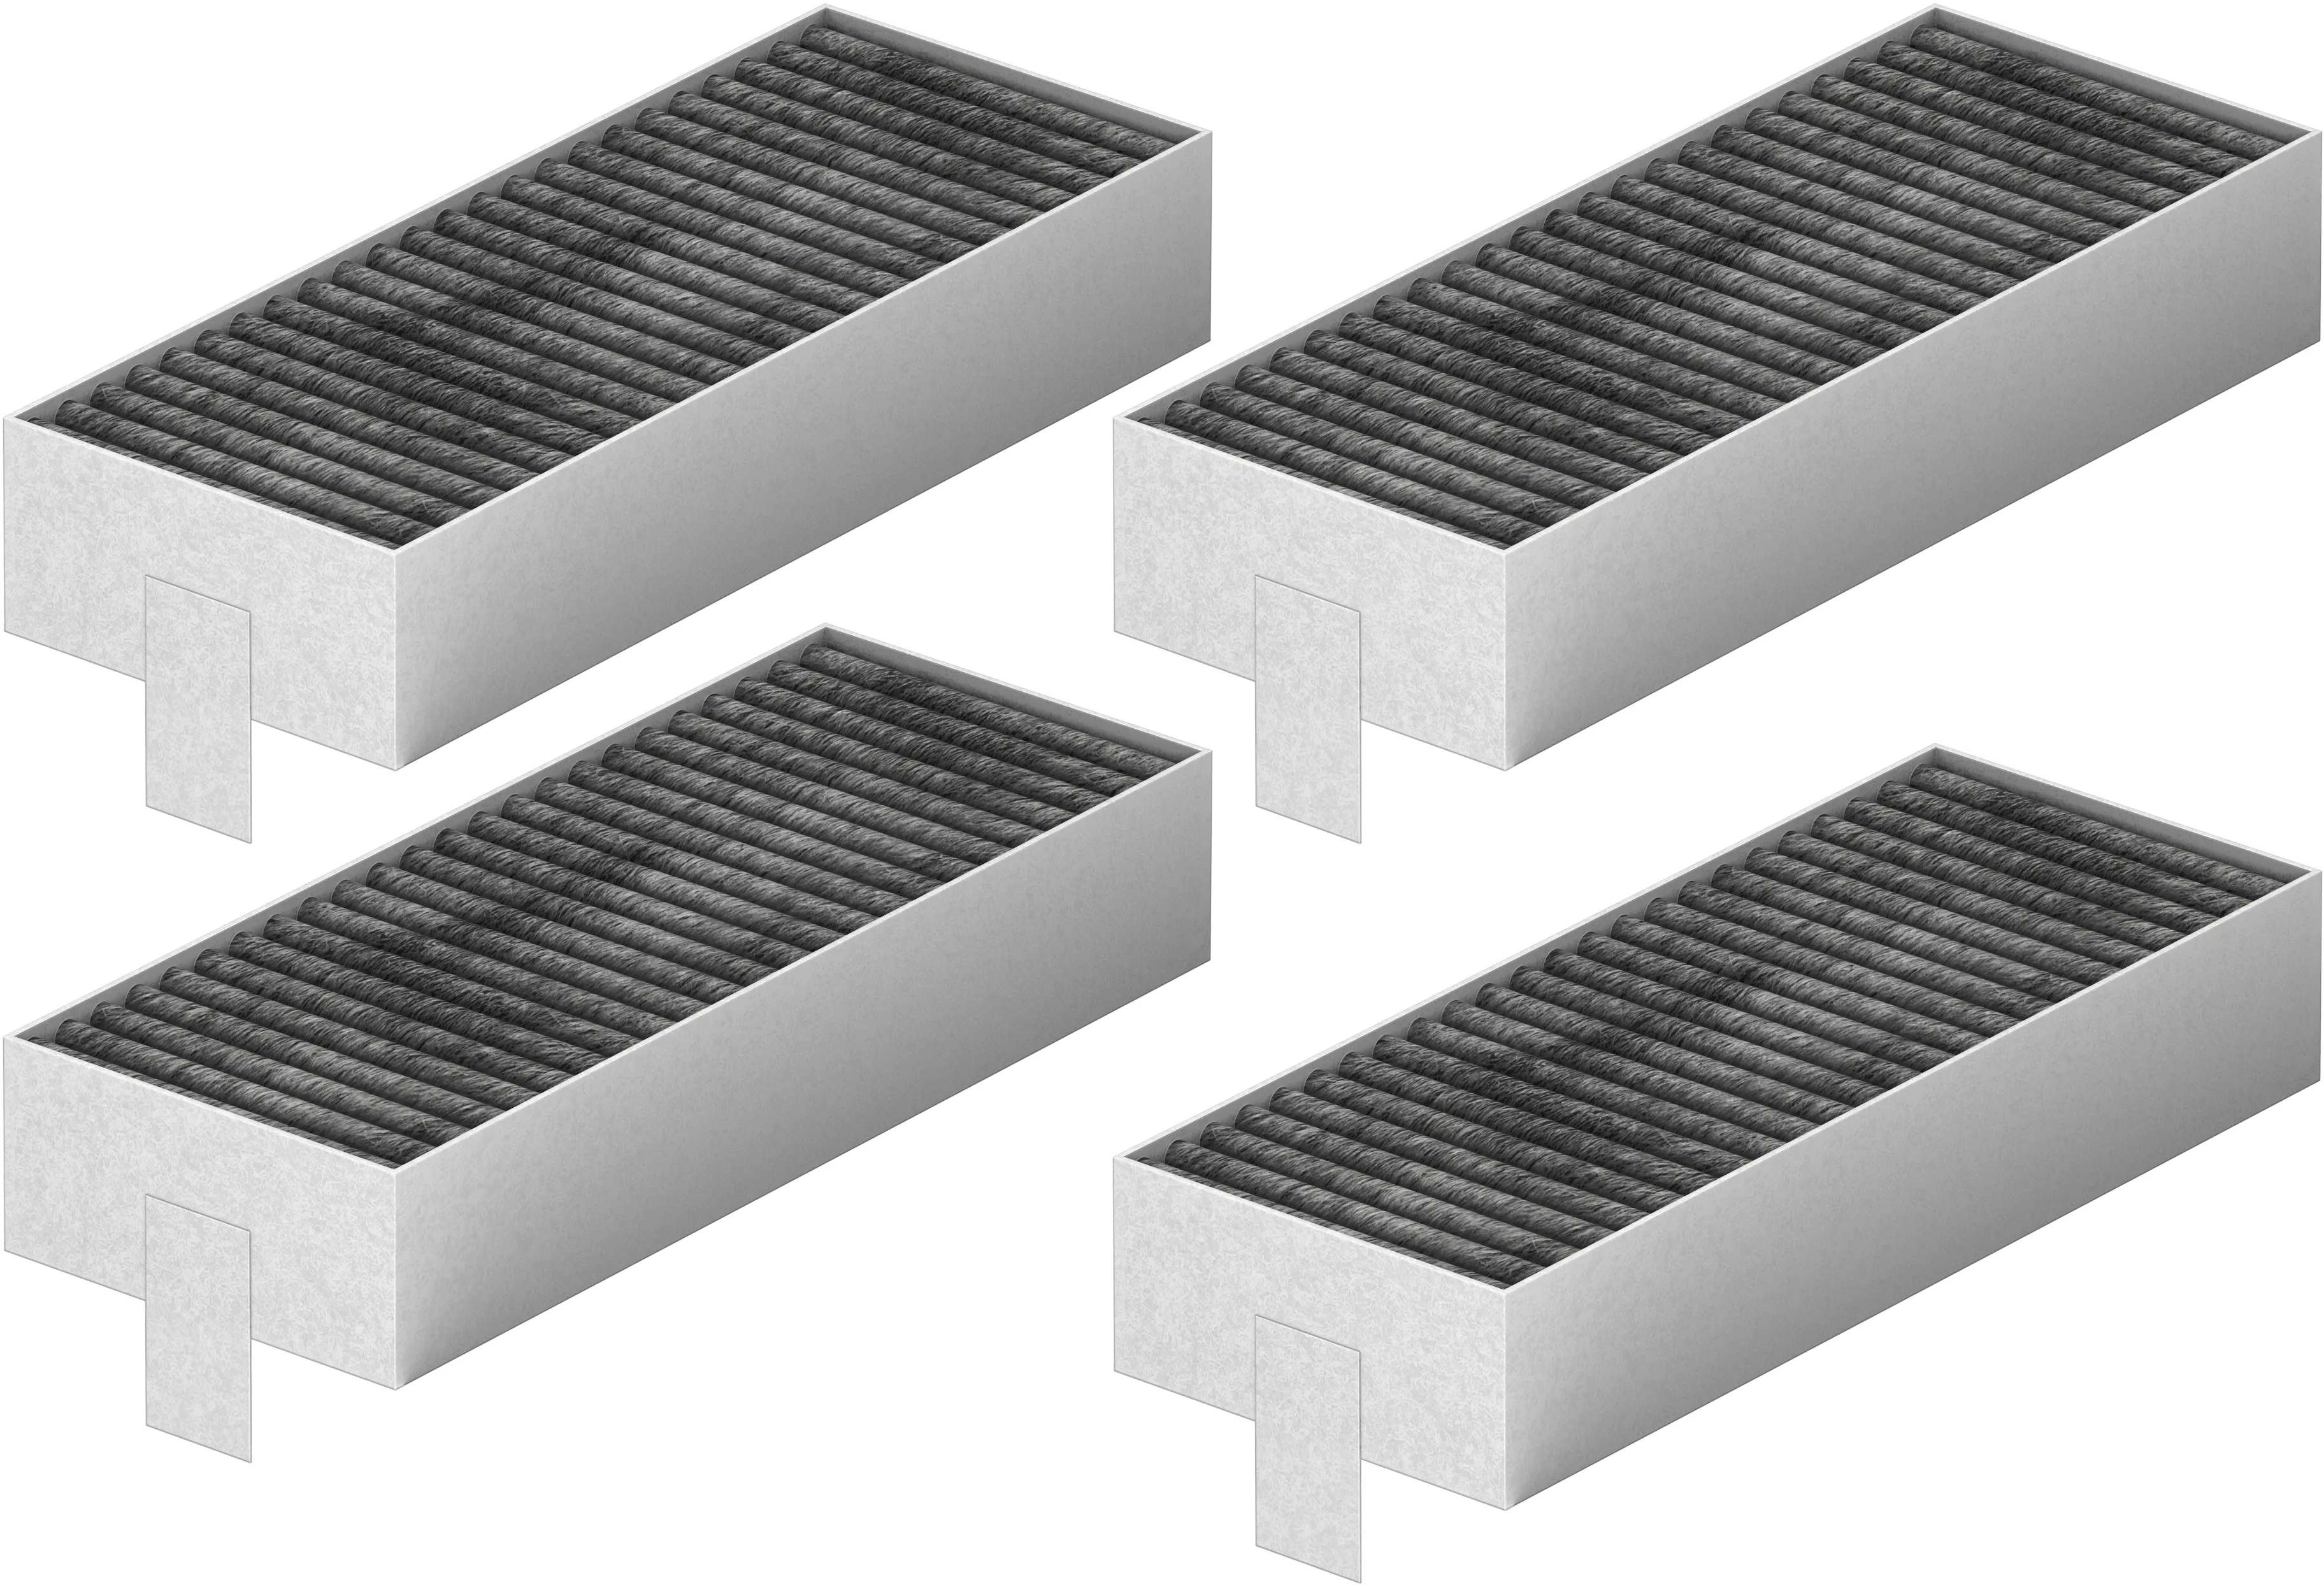 4 High-performance CleanAir Recirculation Filters 